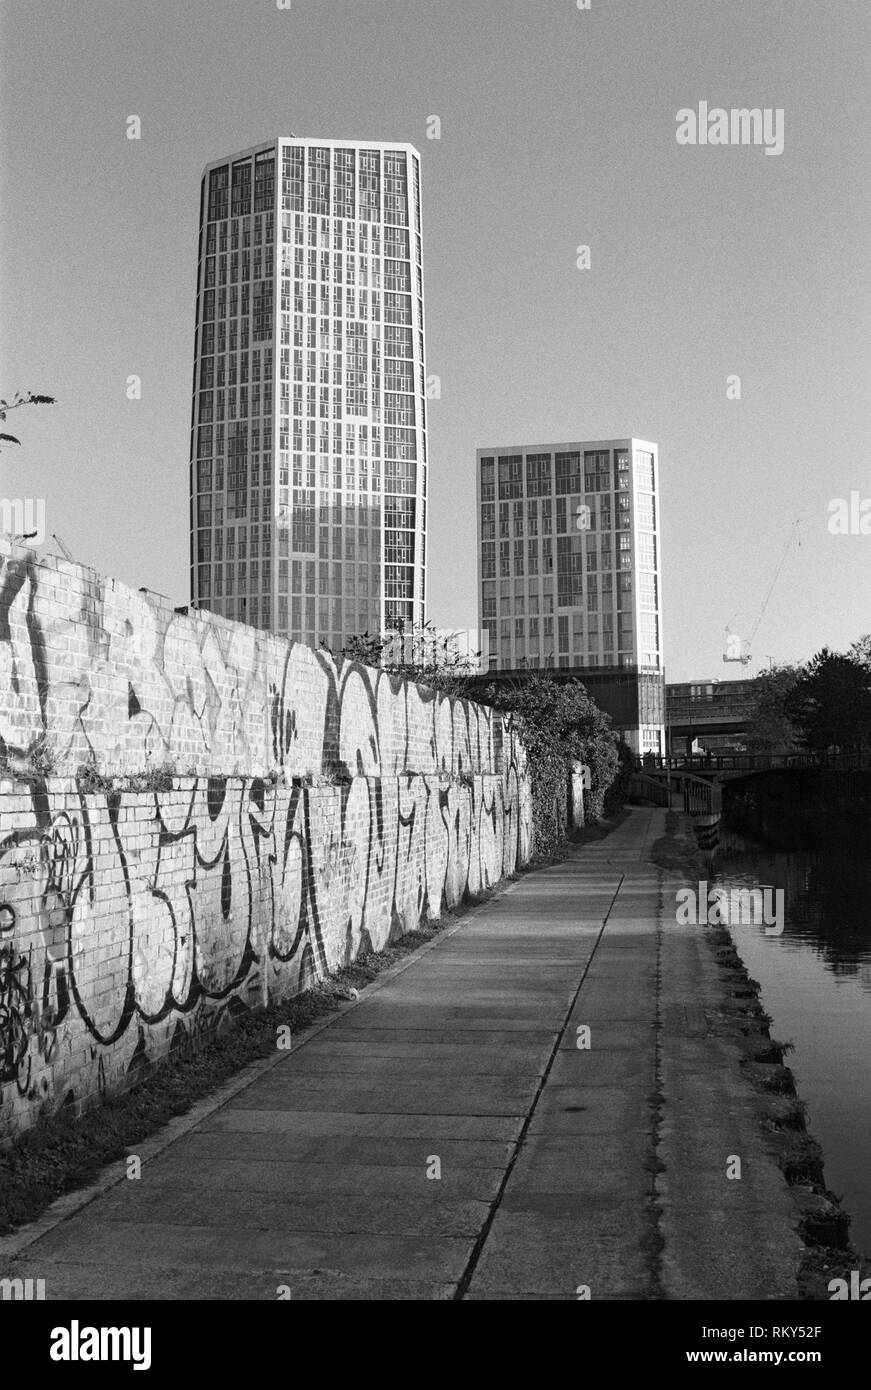 Wall with graffiti along the River Lea near Bow, East London UK, with the new Sky View Tower apartment buildings in background Stock Photo